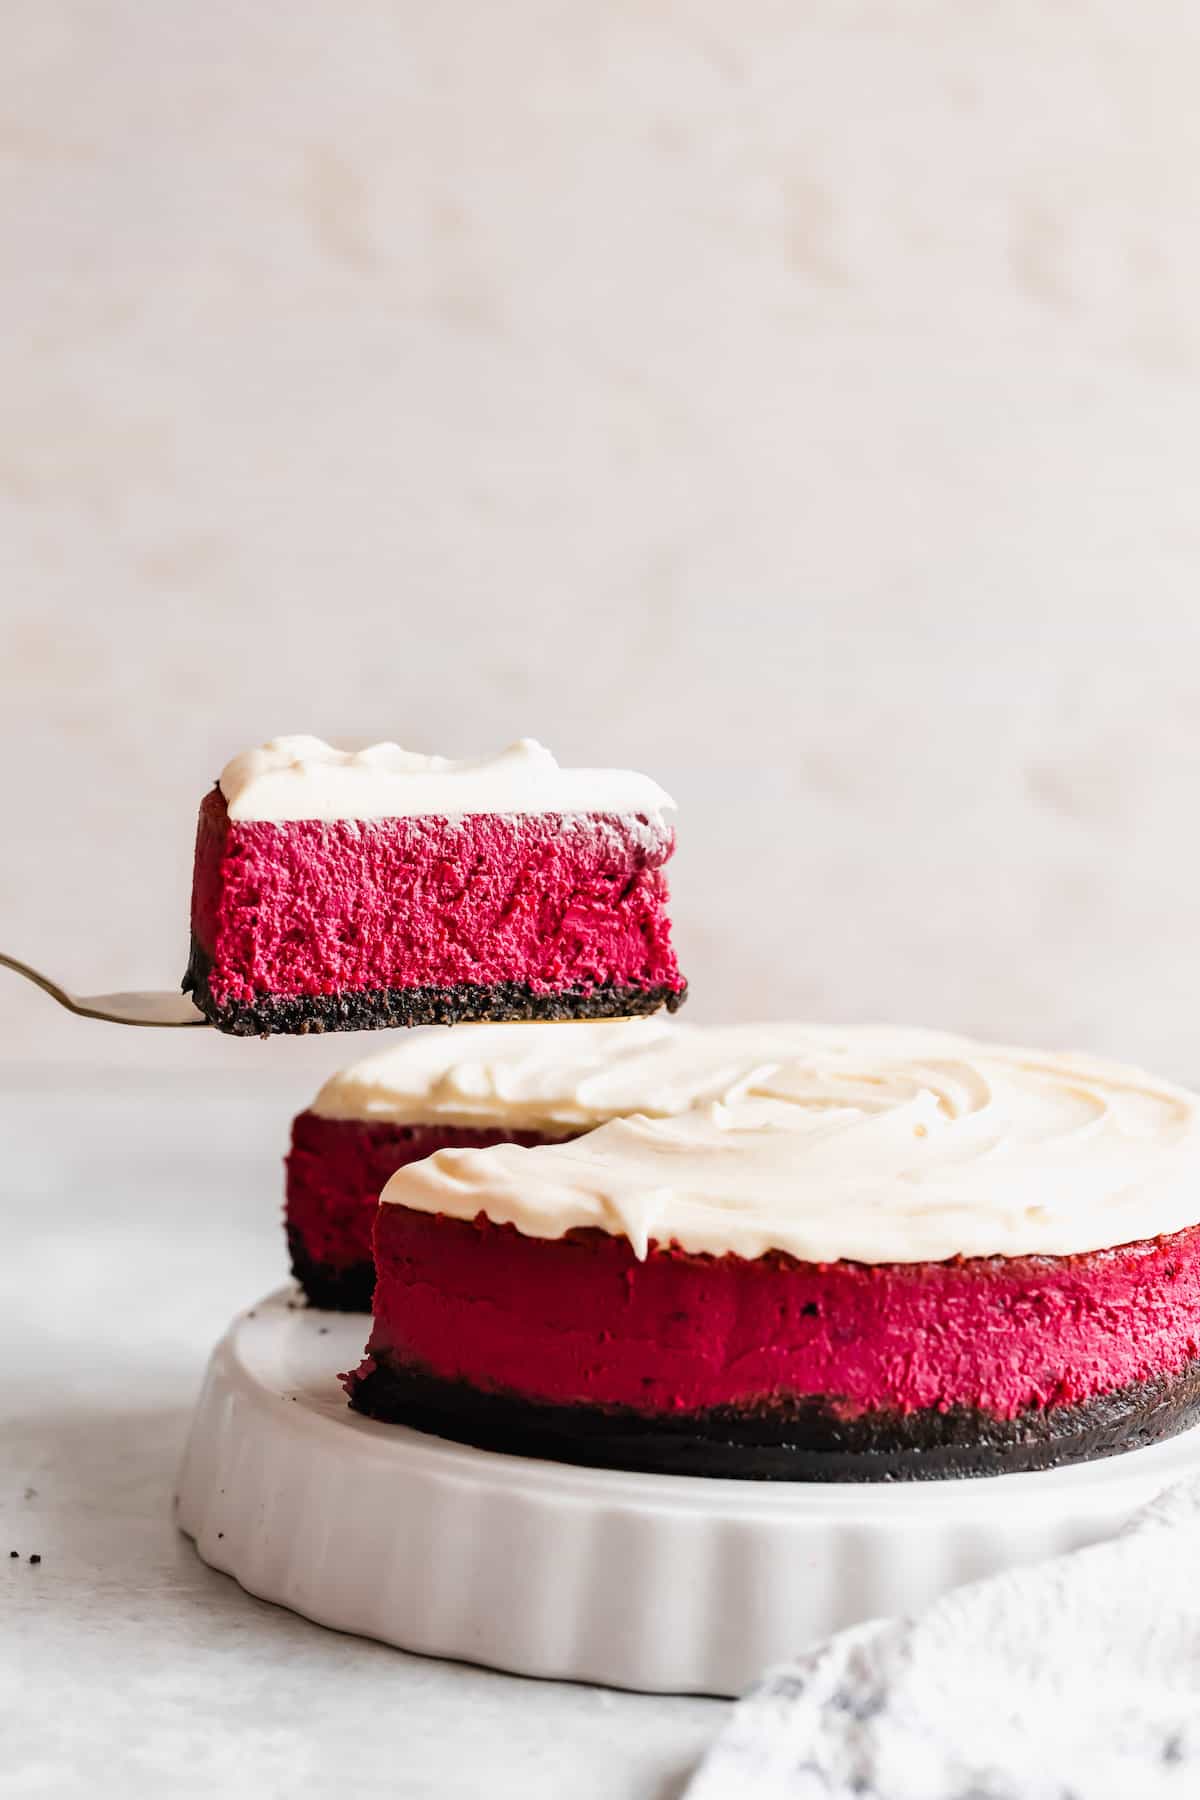 A Slice of Red Velvet Cheesecake Being Lifted From the Rest of the Cake with a Spatula